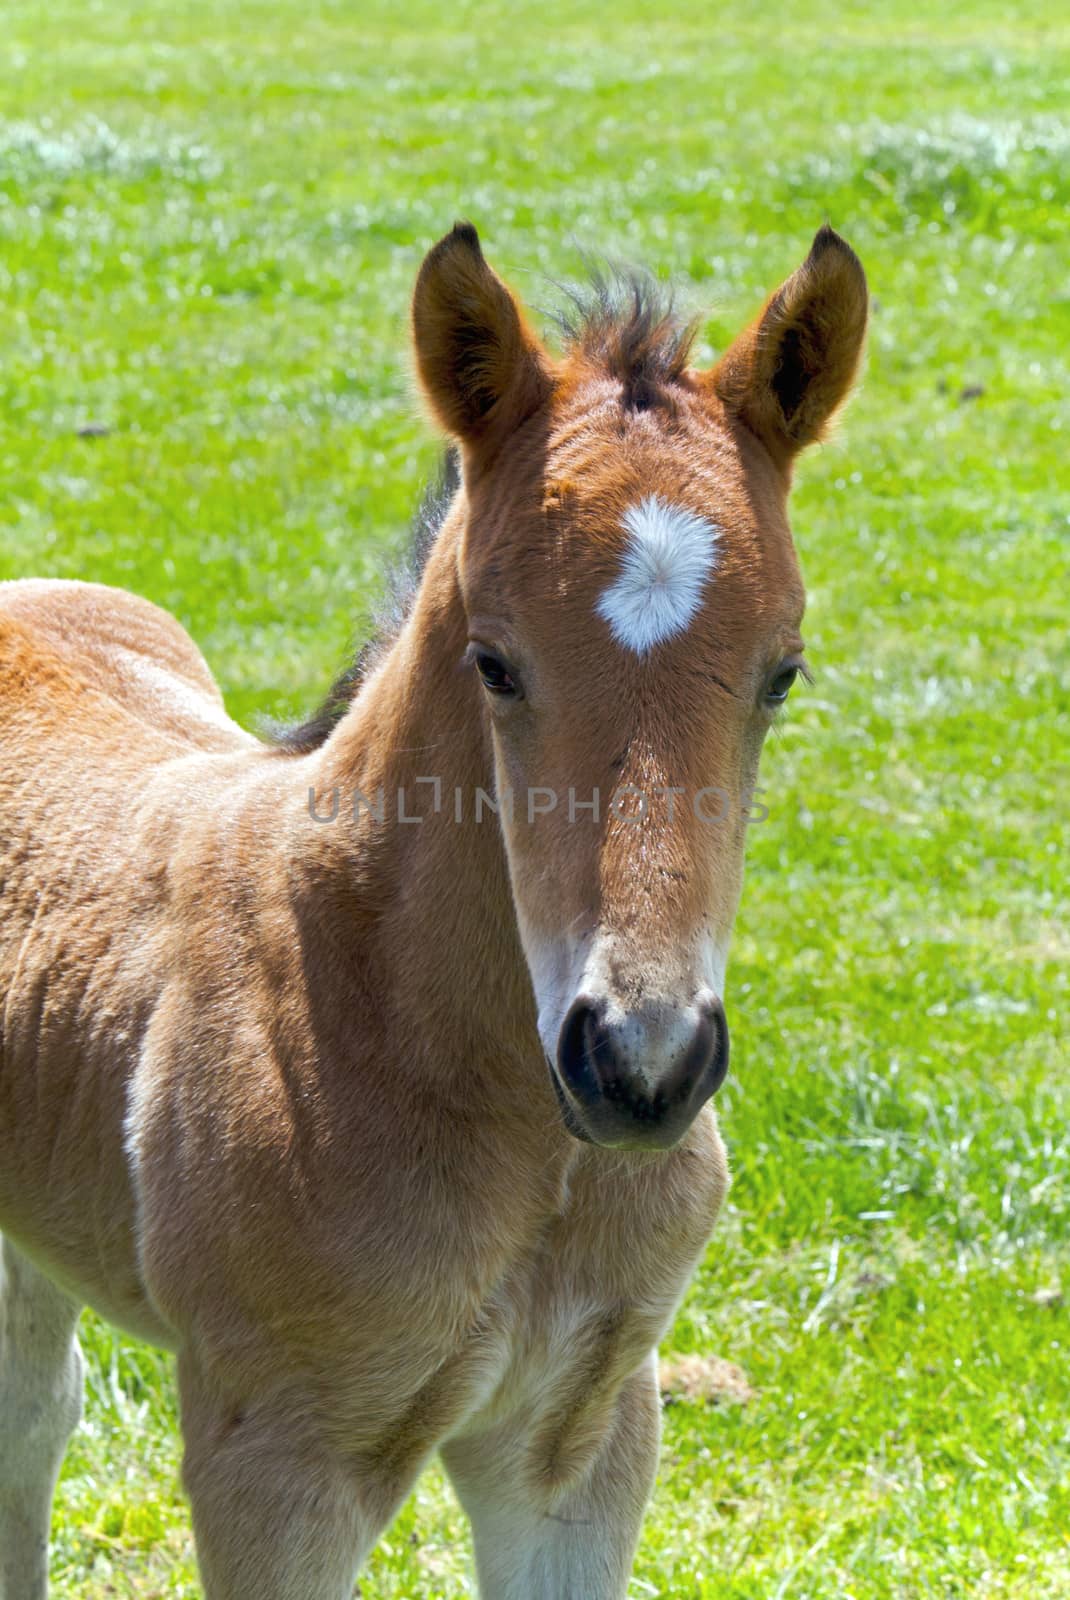 A Young Horse Foal Filly Standing in a Field by instinia